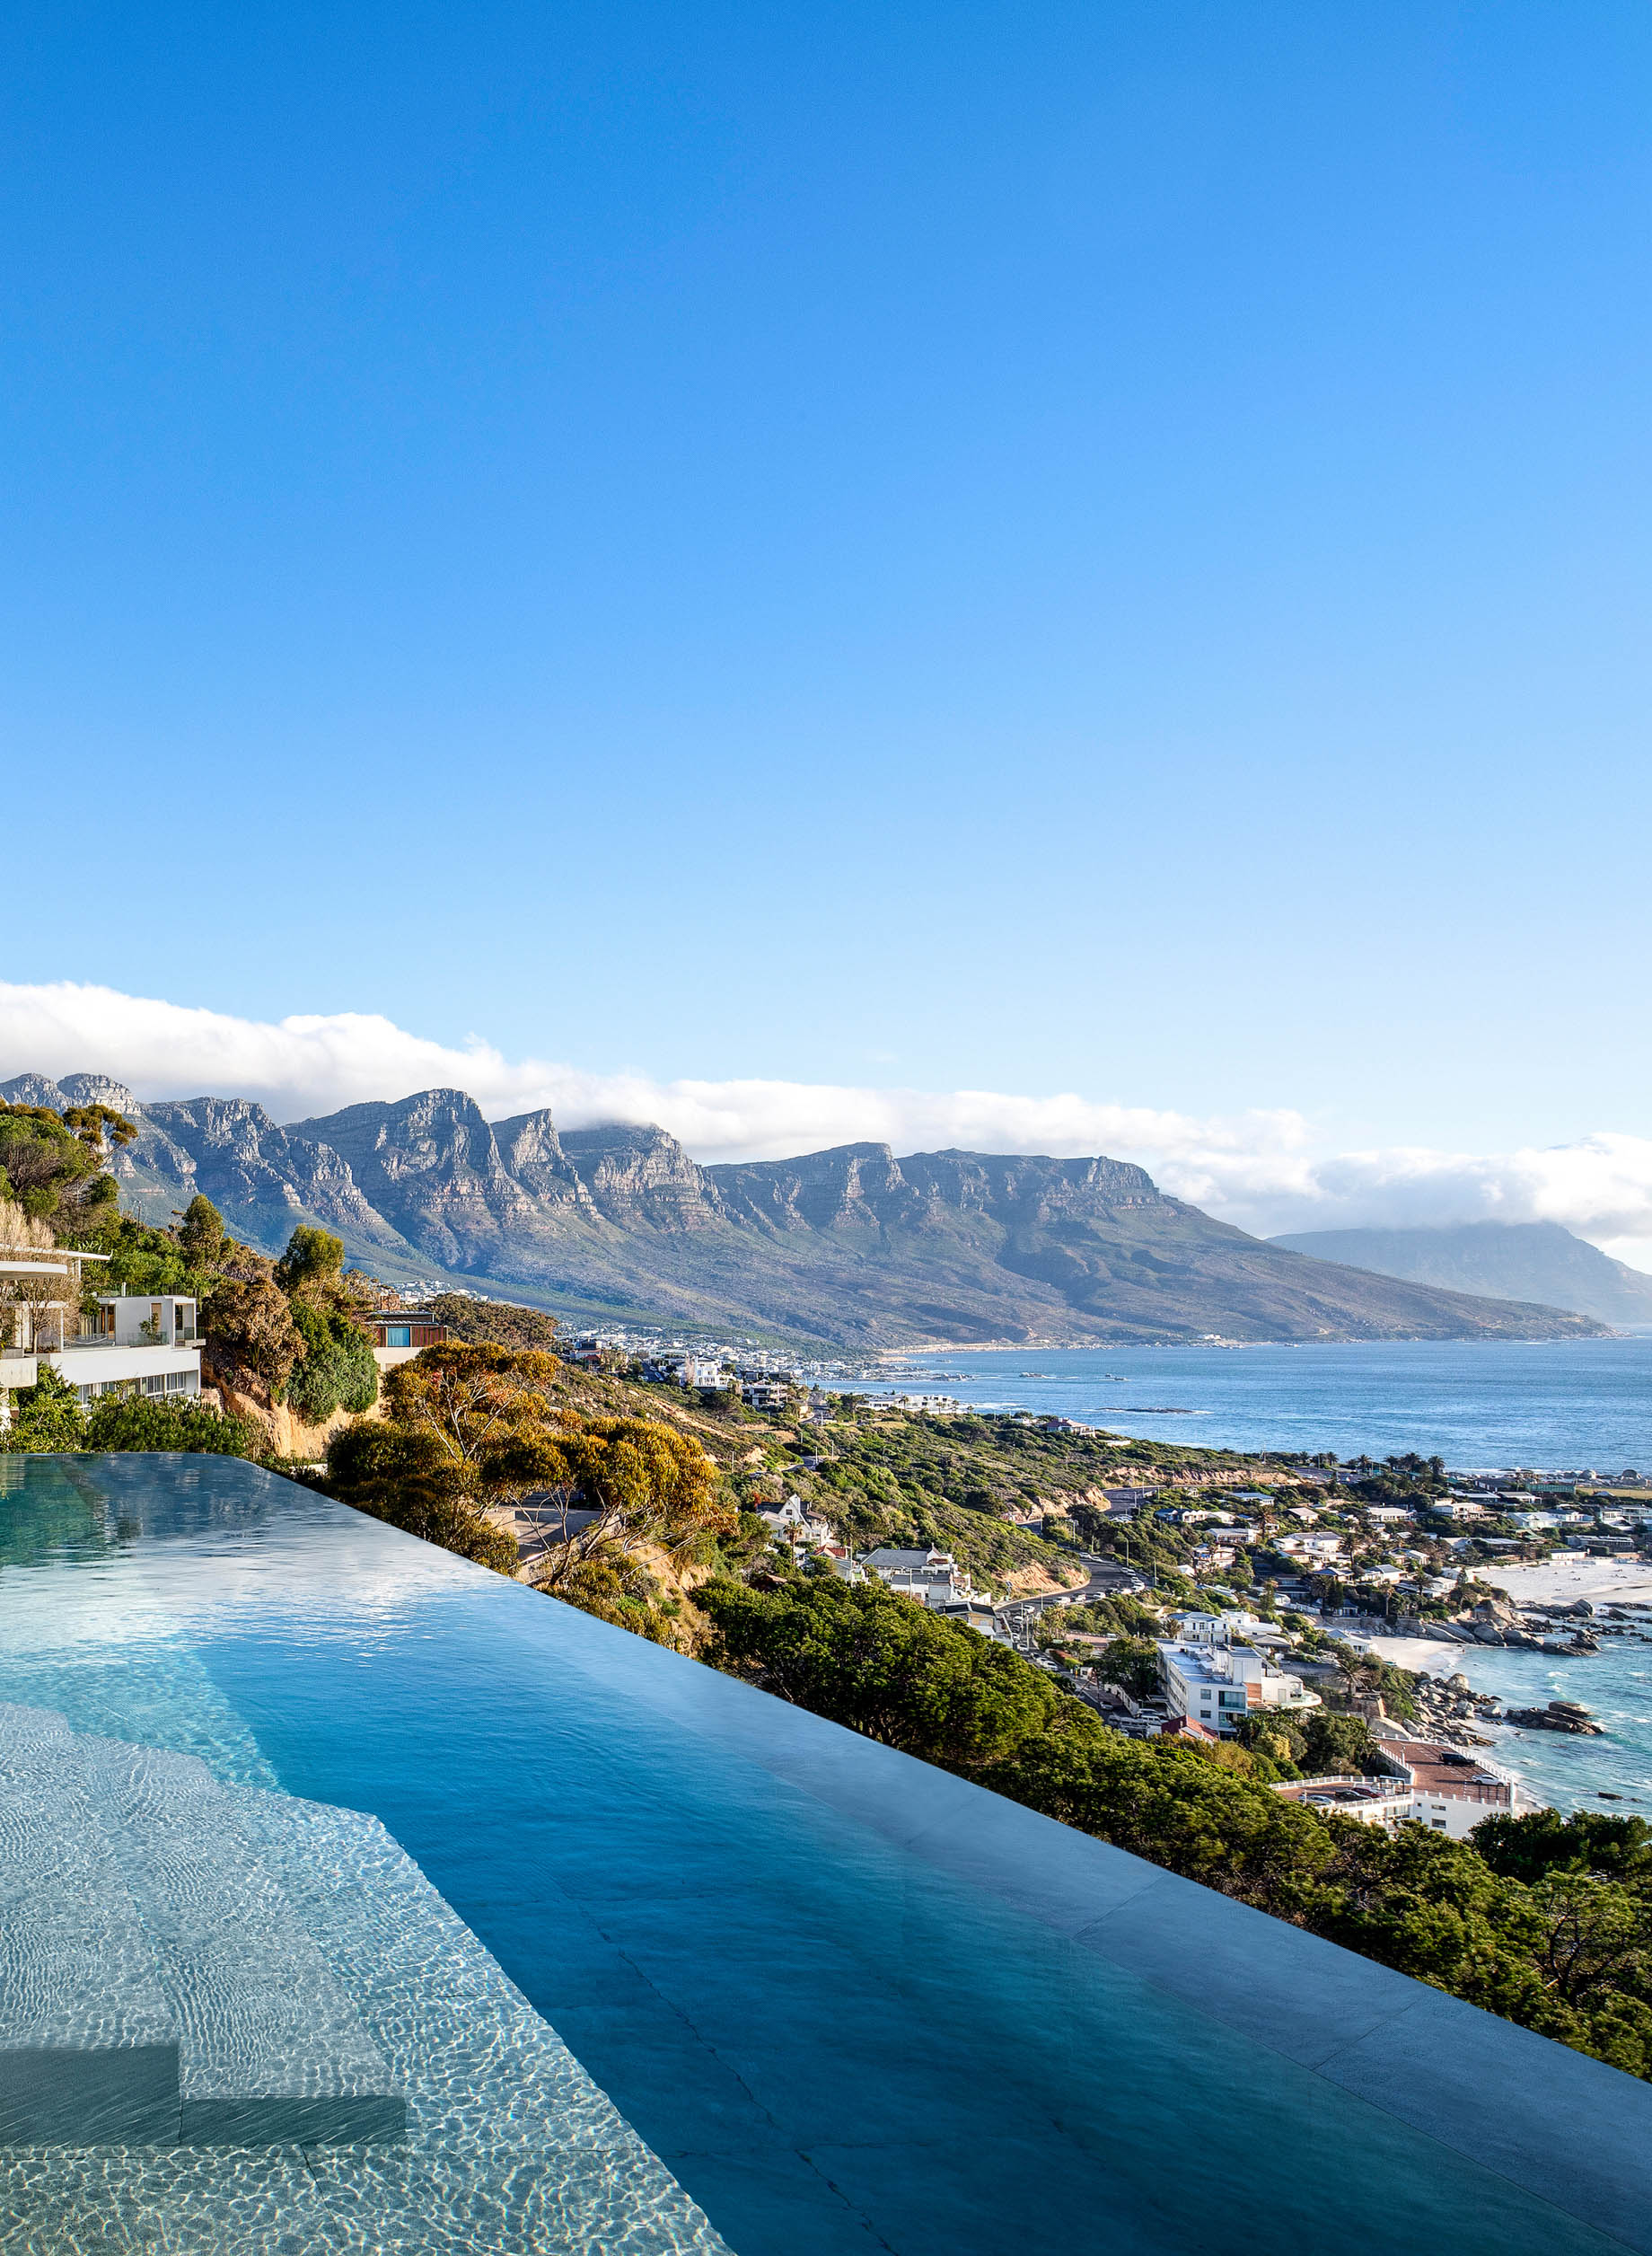 Kloof 145 SAOTA House – Clifton, Cape Town, South Africa